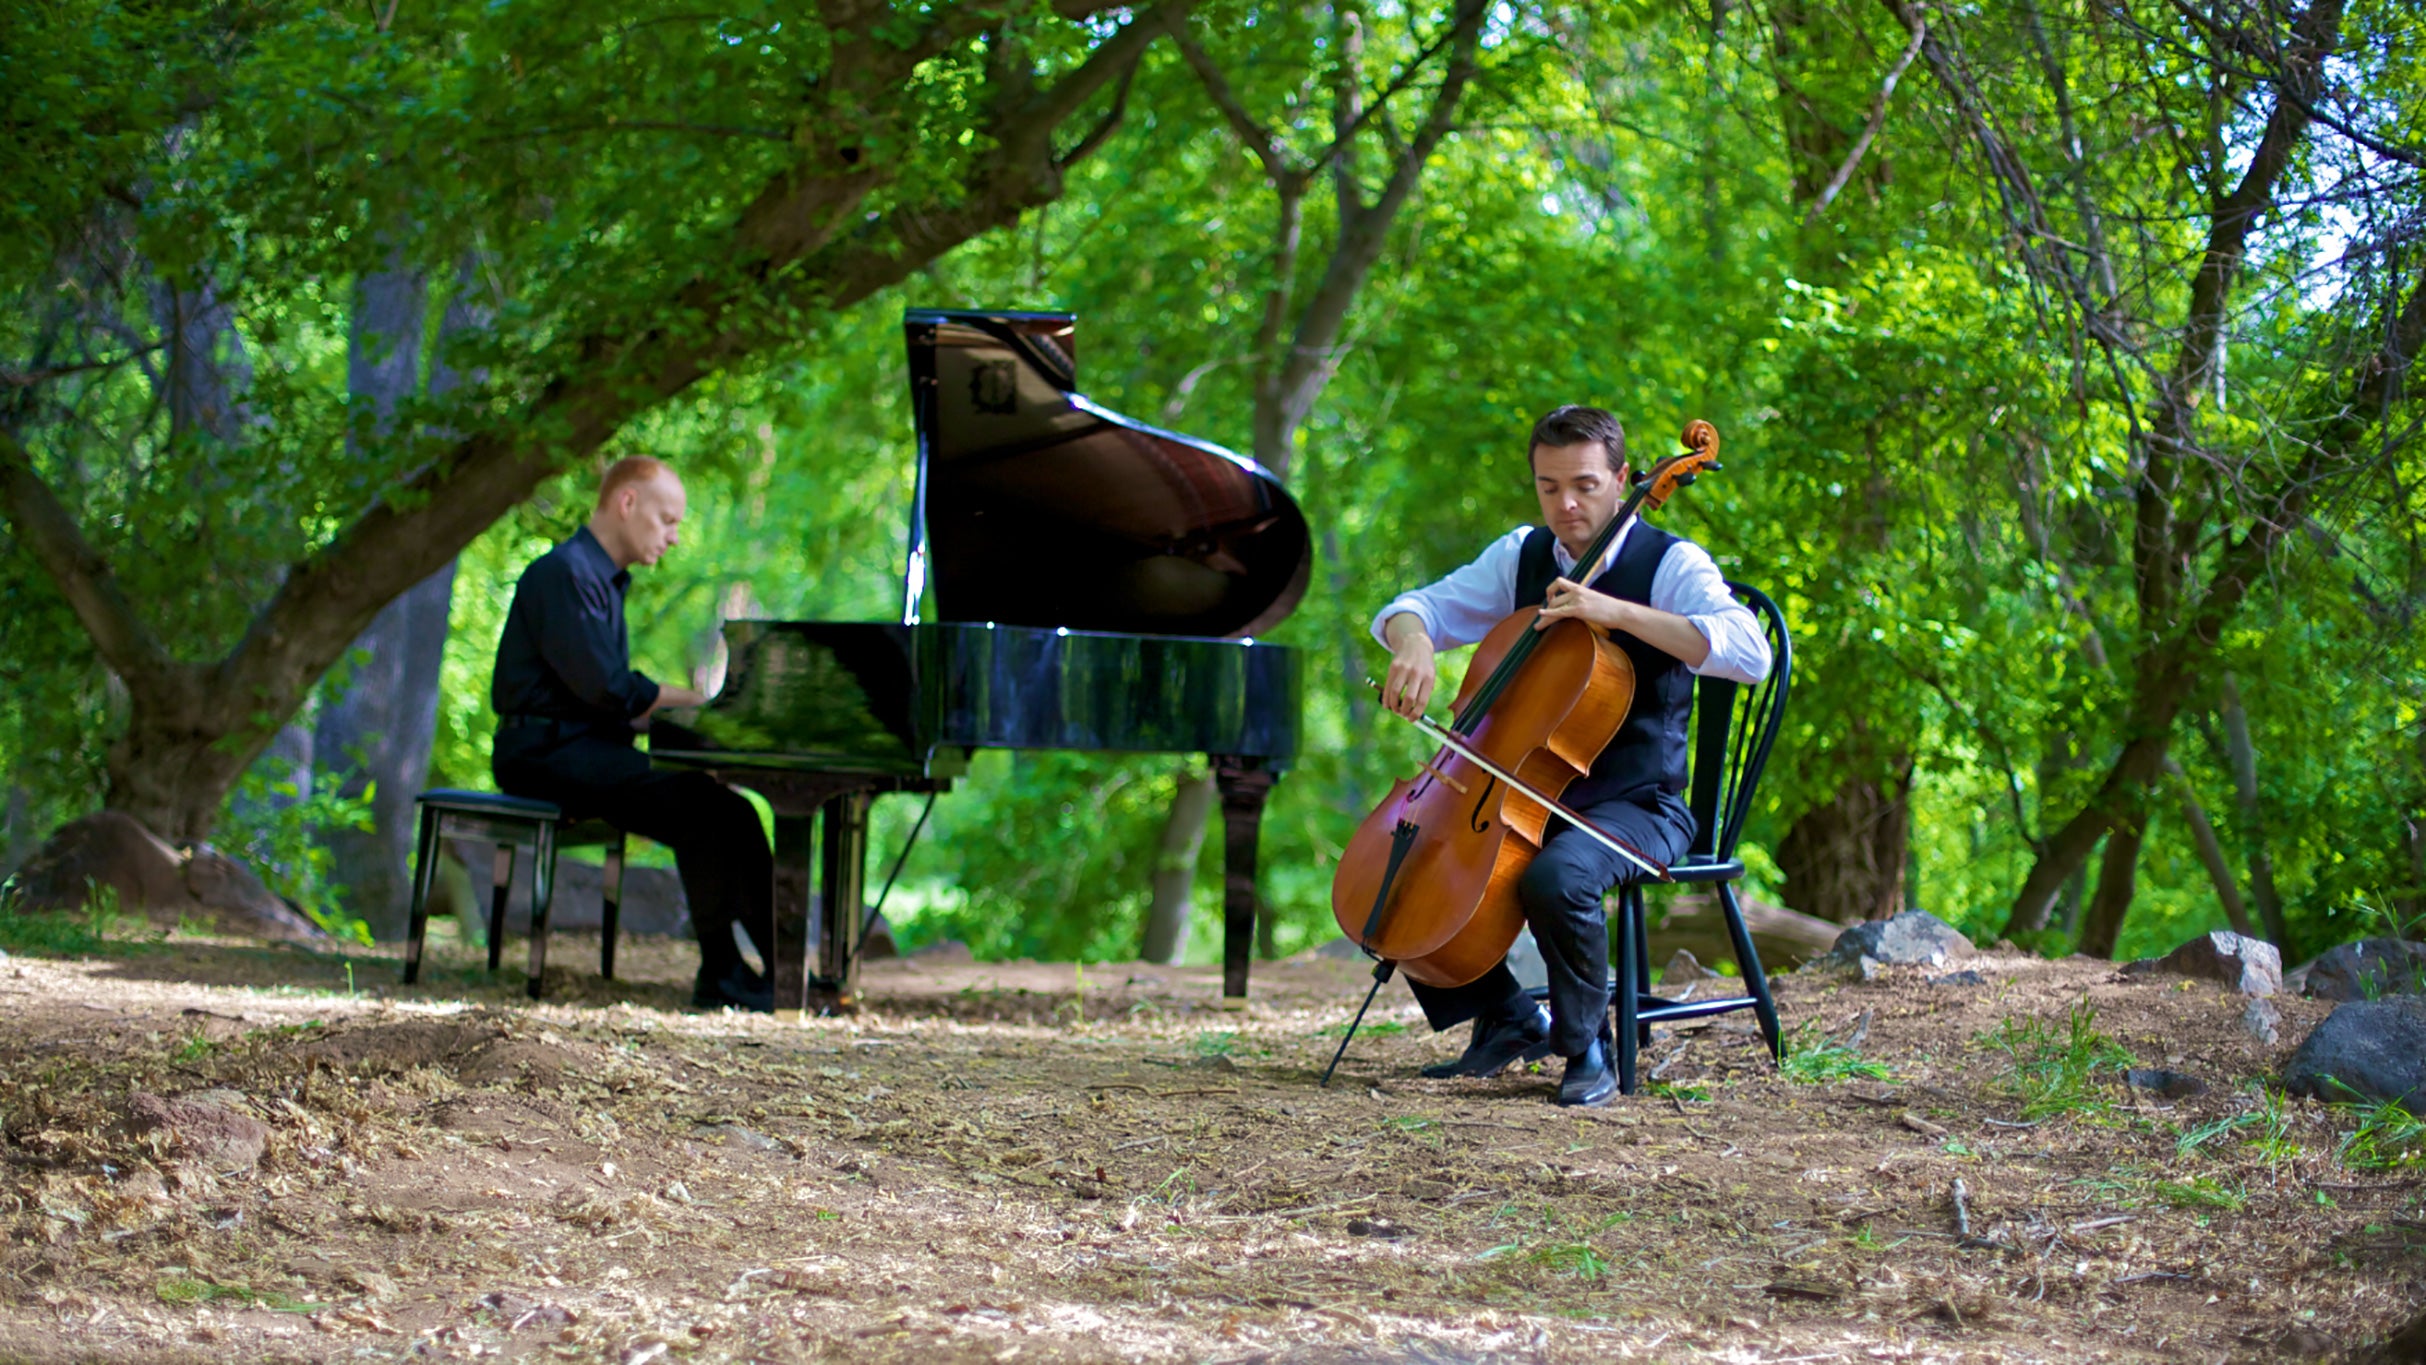 The Piano Guys pre-sale passcode for genuine tickets in Waukegan